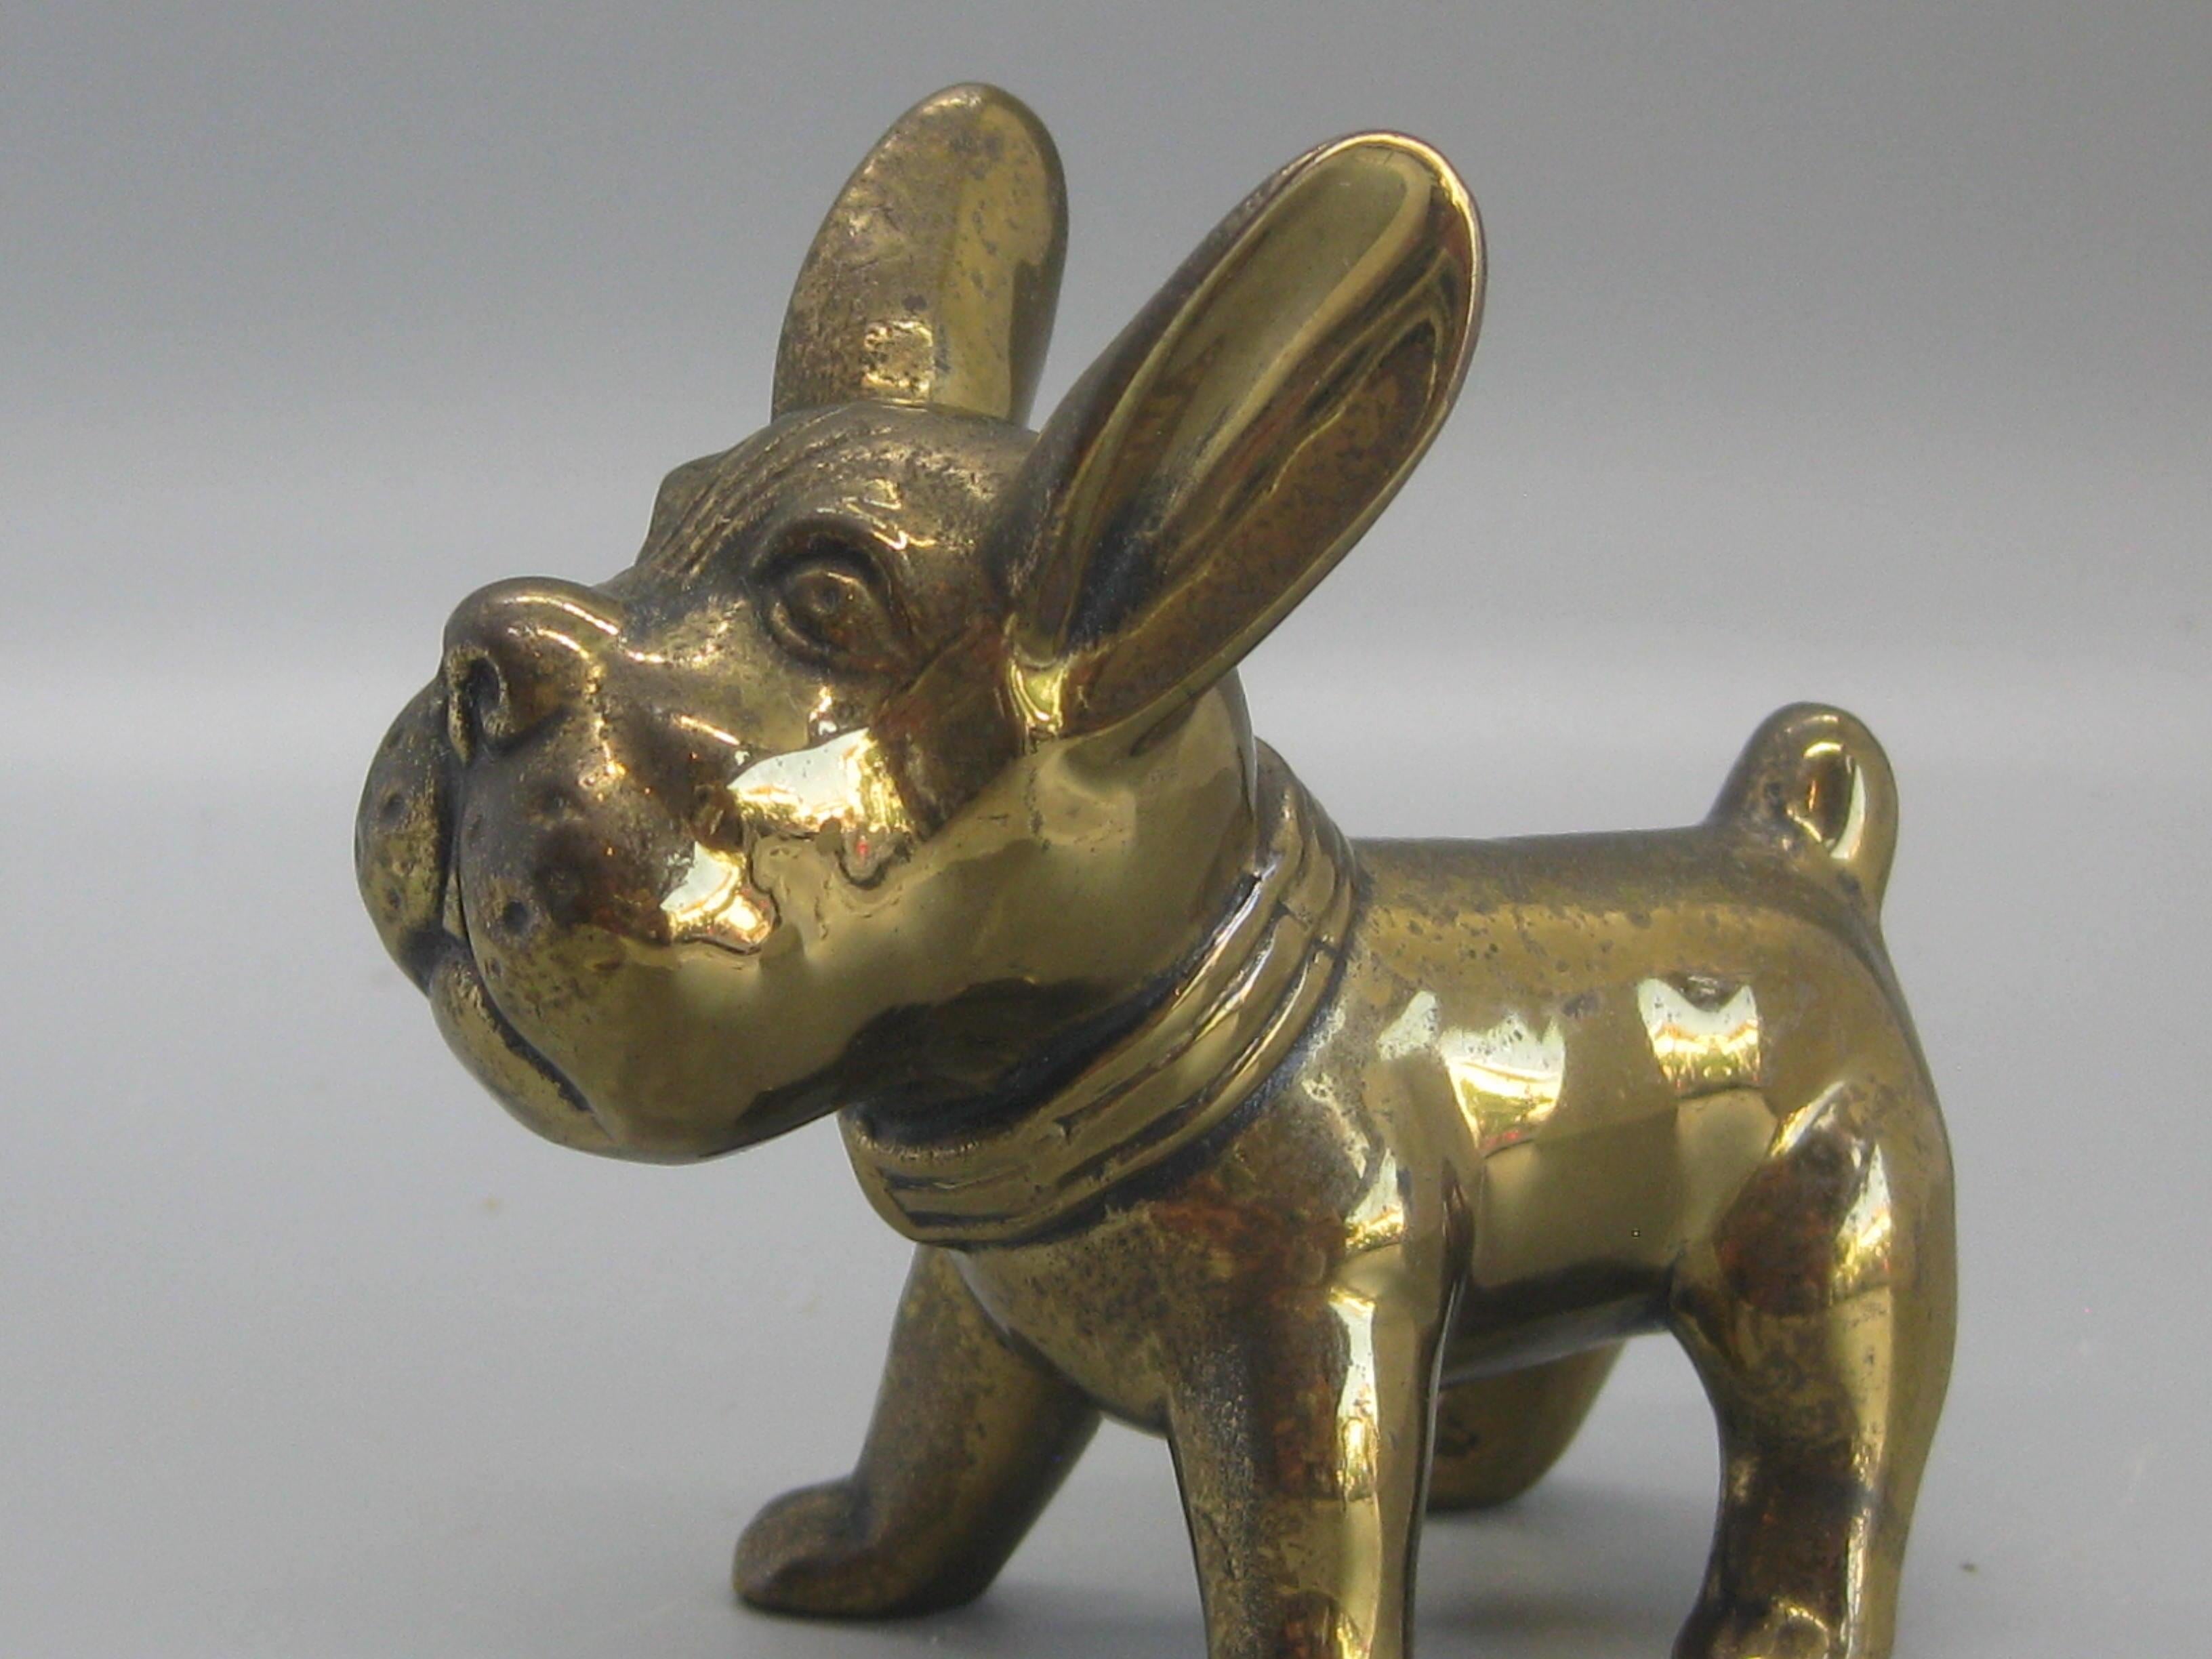 Antique hollow cast brass Art Deco French Bulldog figurine/sculpture made by Jennings brothers, circa 1920s-1930s. Signed on the bottom with the makers mark 